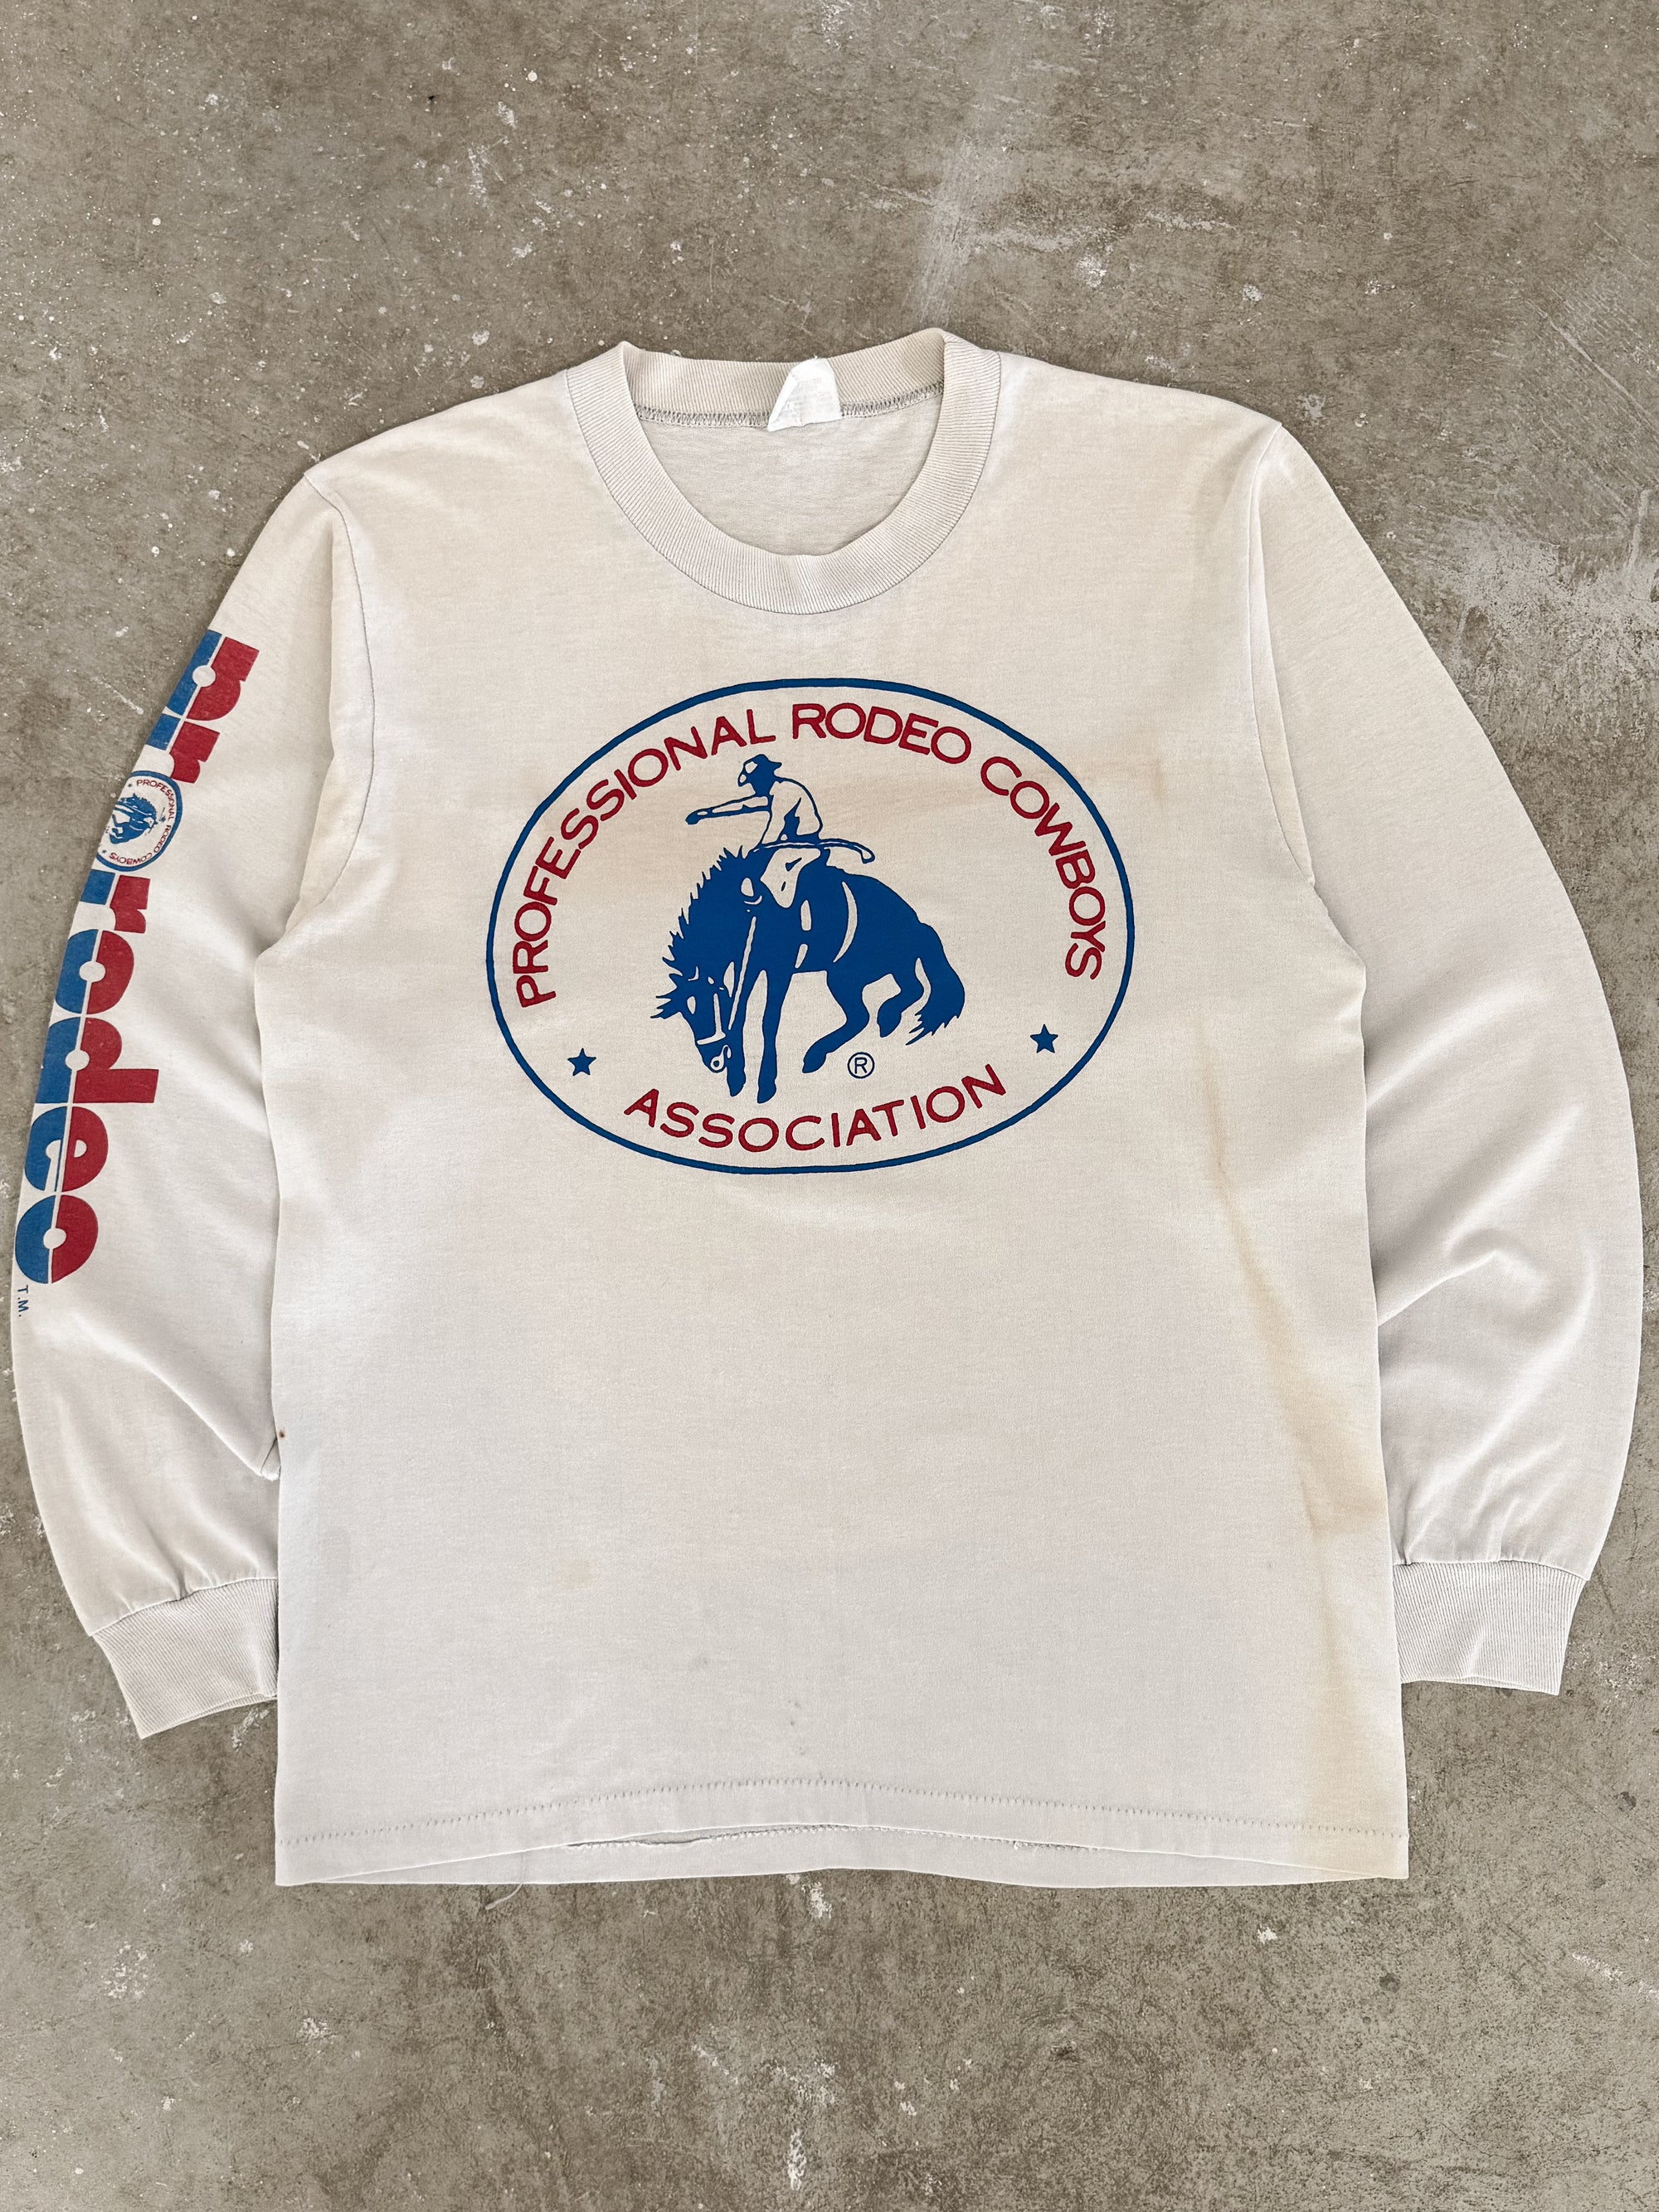 1980s "Professional Rodeo Cowboys" Long Sleeve Tee (M)